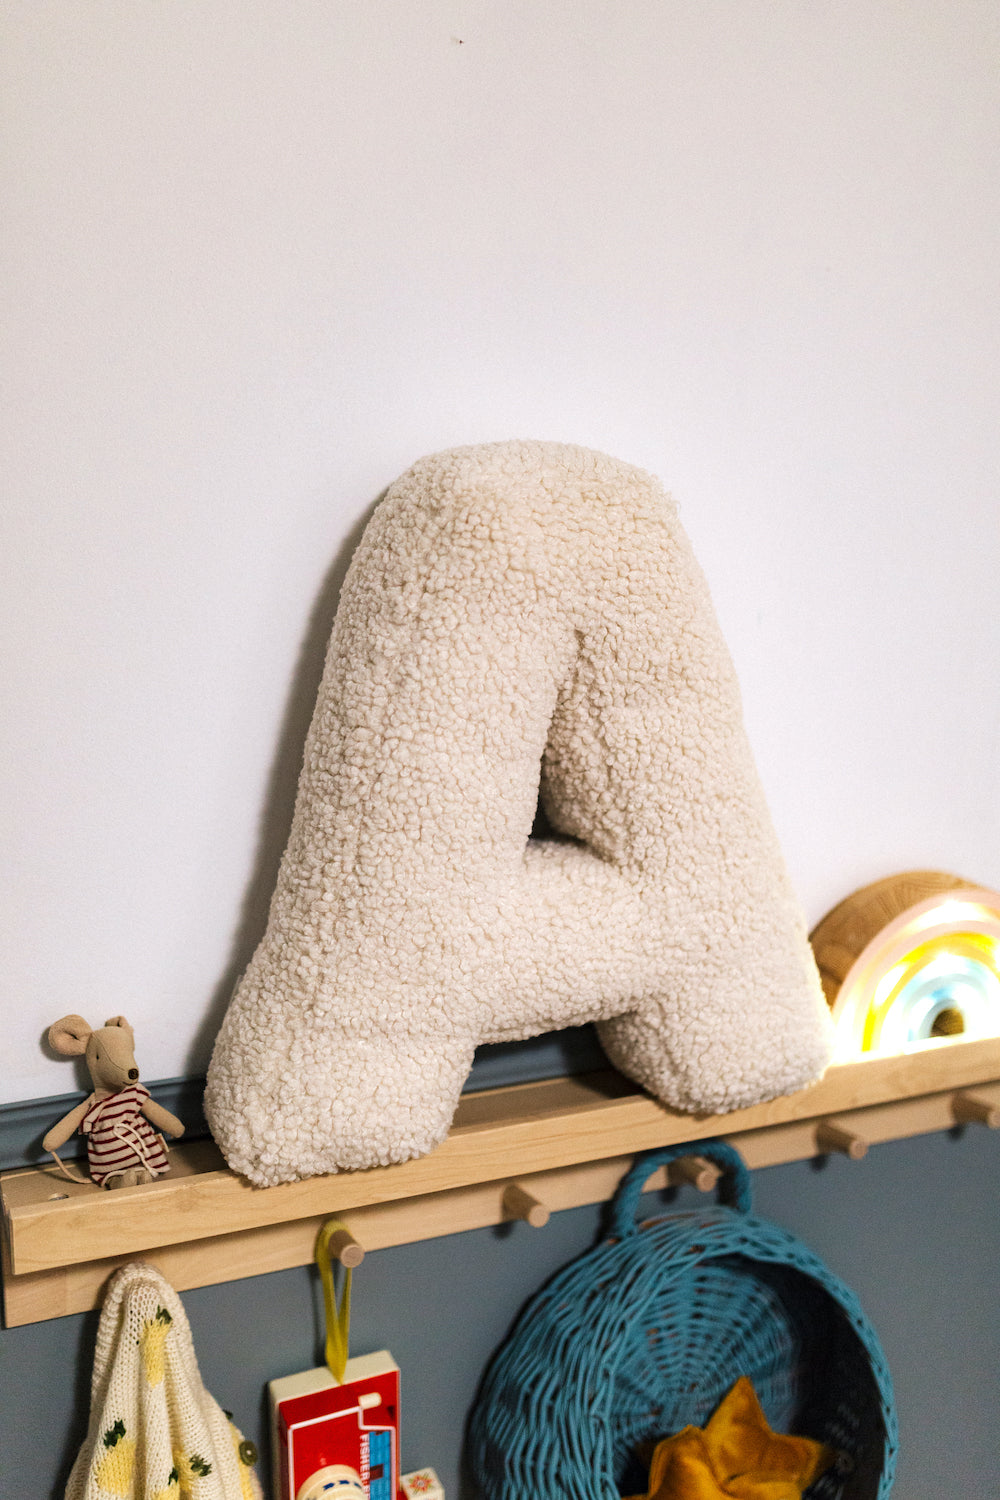 Boucle Letter cushion A by Bettys Home Teddy Letter Pillow decoration cushion A in kids room on booksheelf